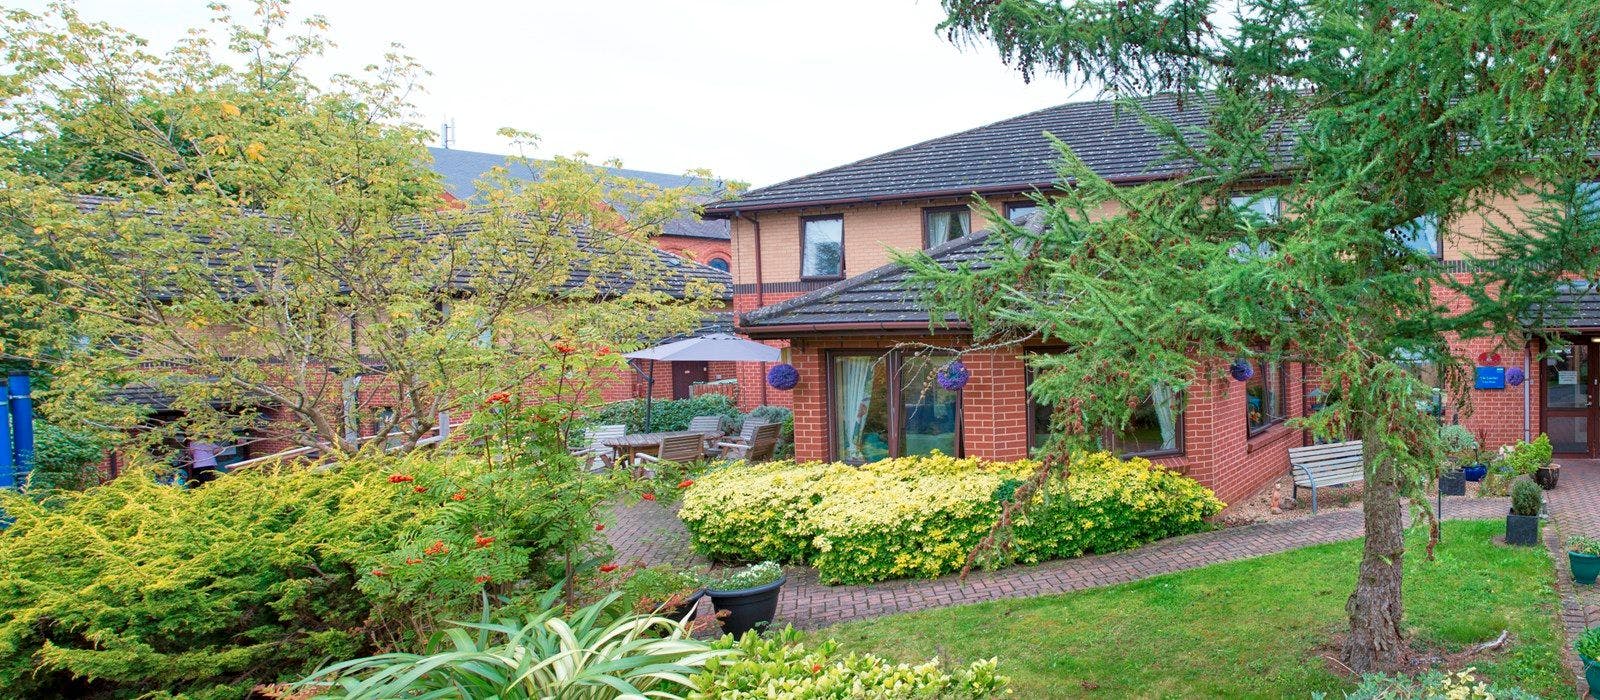 The Cedars and Larches care home